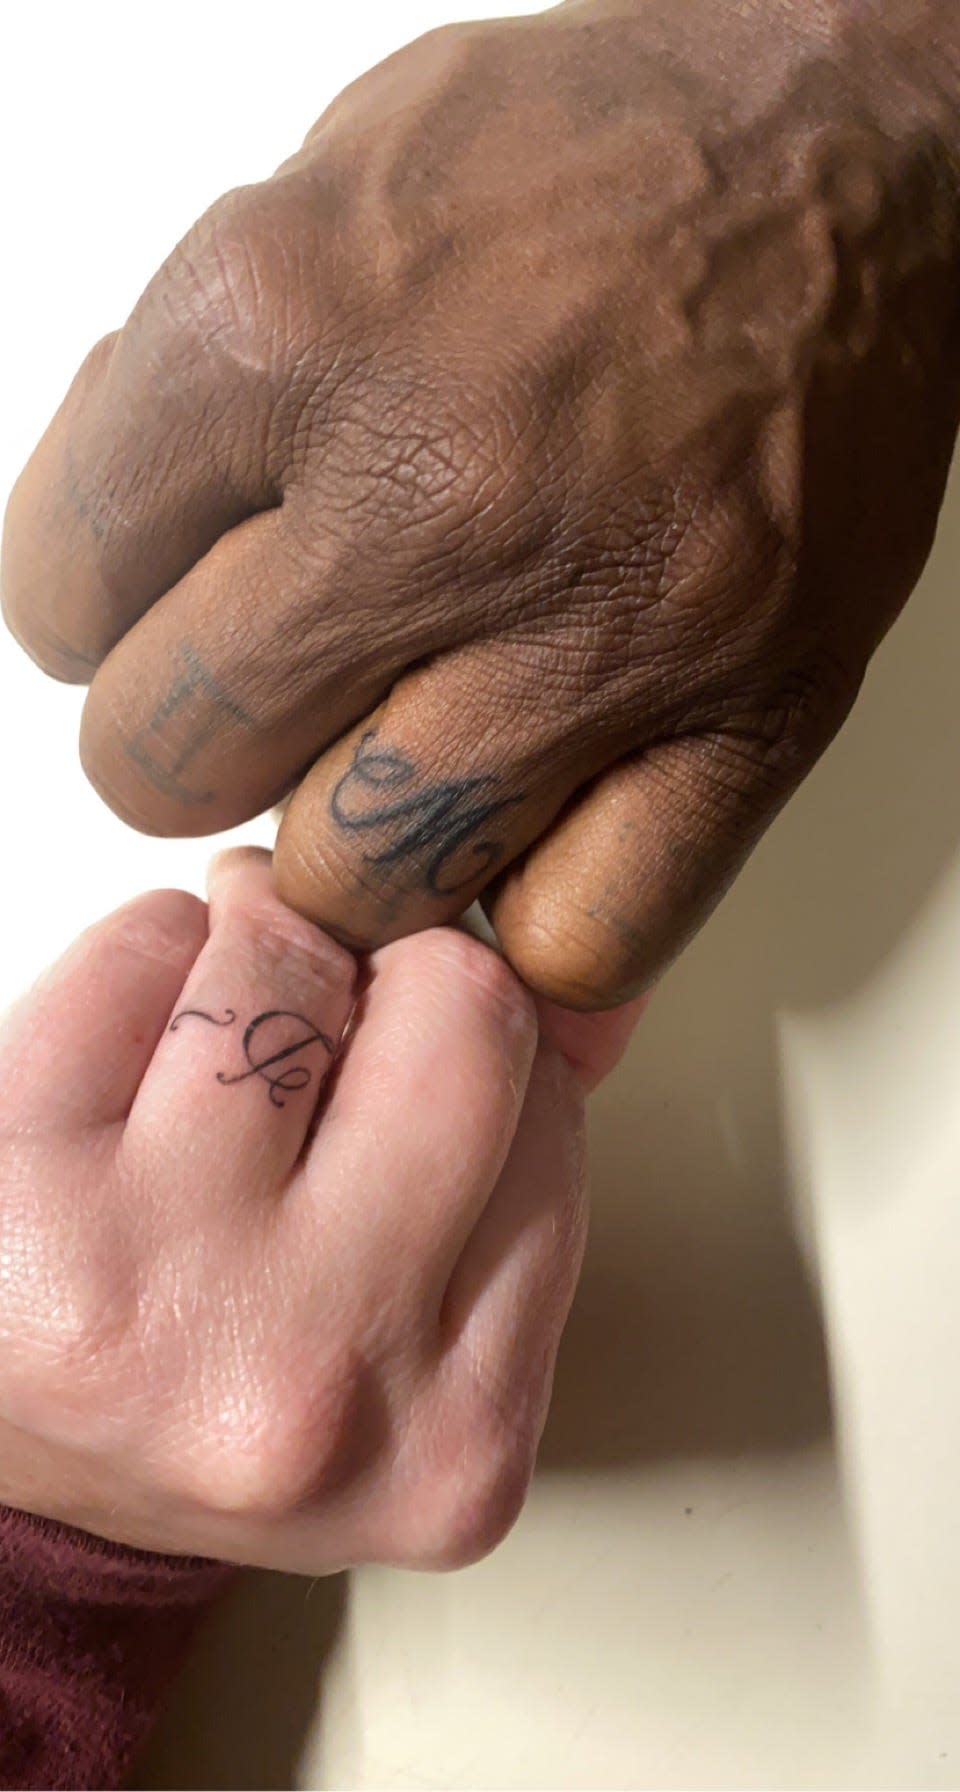 Miranda Koons and her fiance, Devon May, chose to tattoo their initials on their ring fingers, forgoing wedding bands.